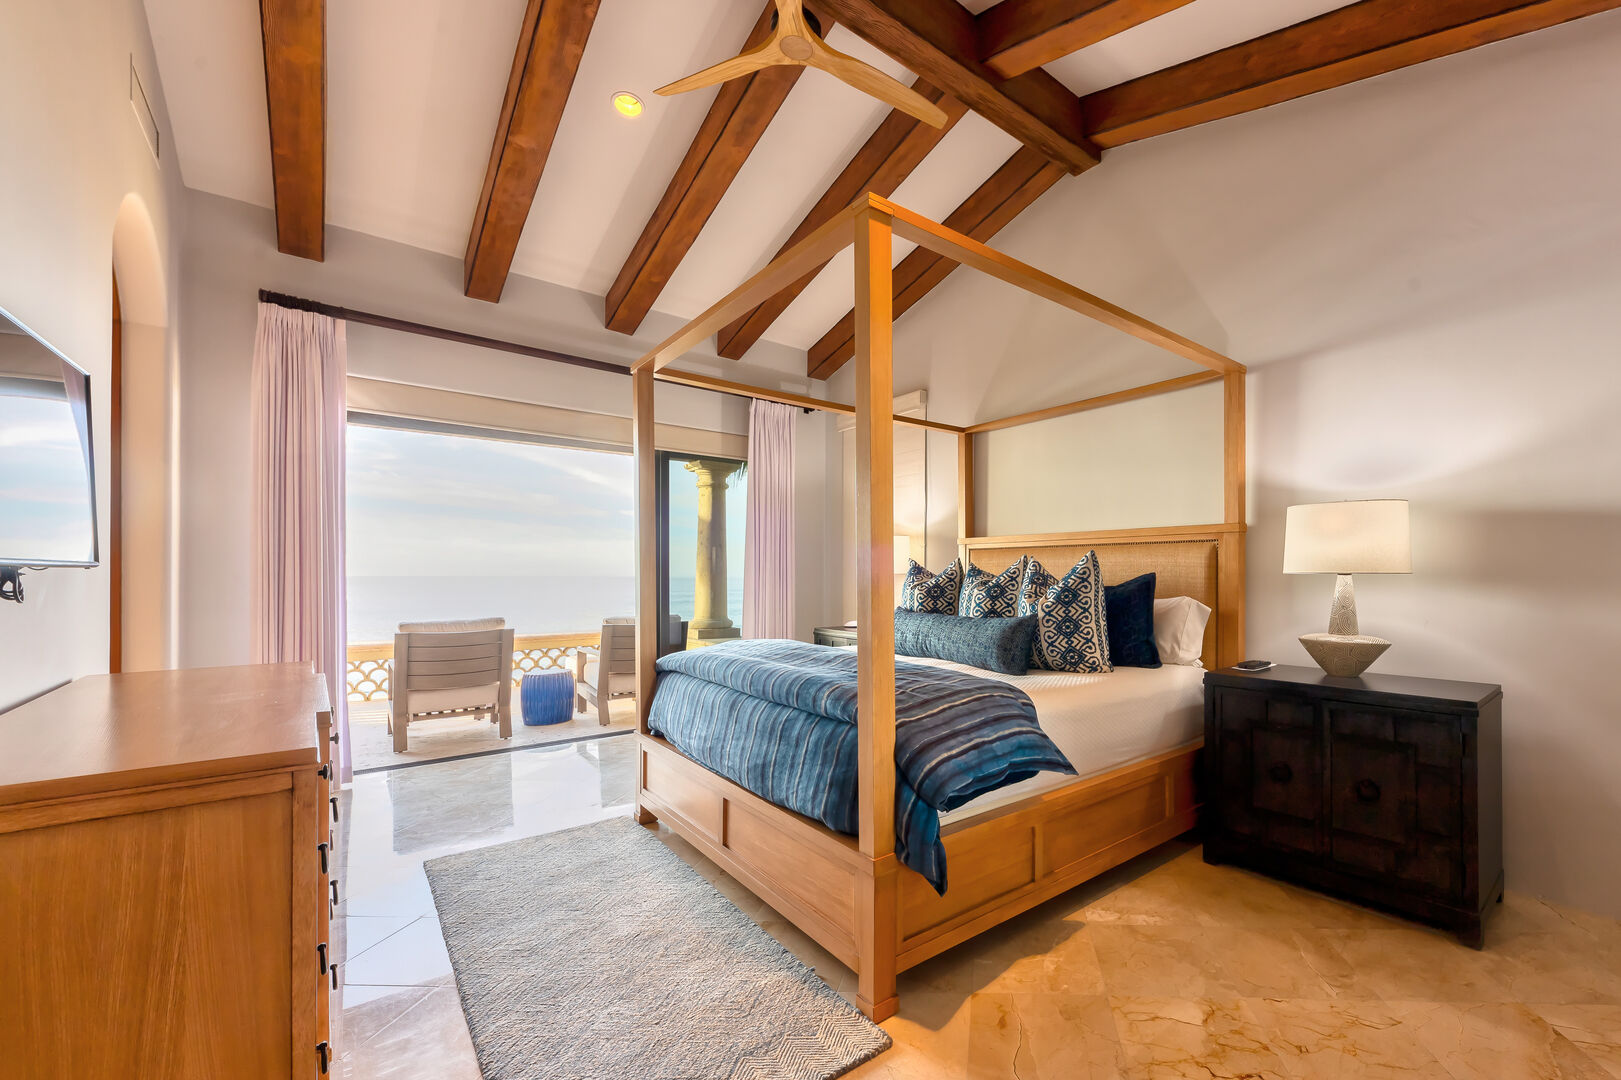 Fourth Master Bedroom with a king size bed and a nightstand